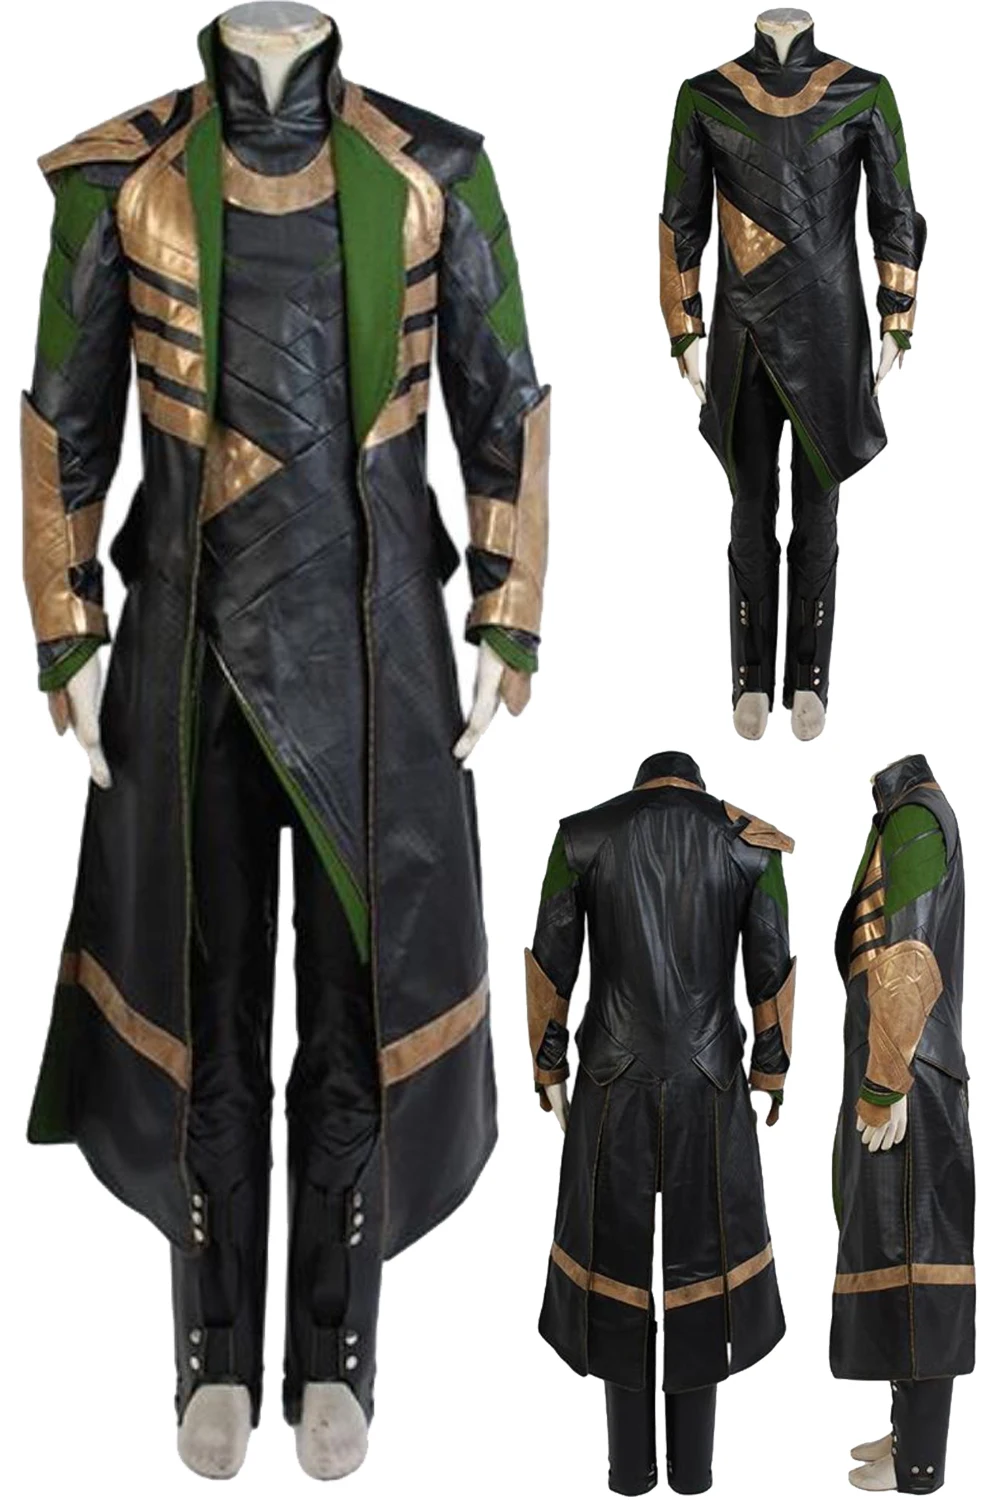 

Loki Cosplay Role Play Battle Suit 2023 TV Super Villain Costume Adult Men Roleplay Male Fantasy Fancy Dress Up Party Clothes